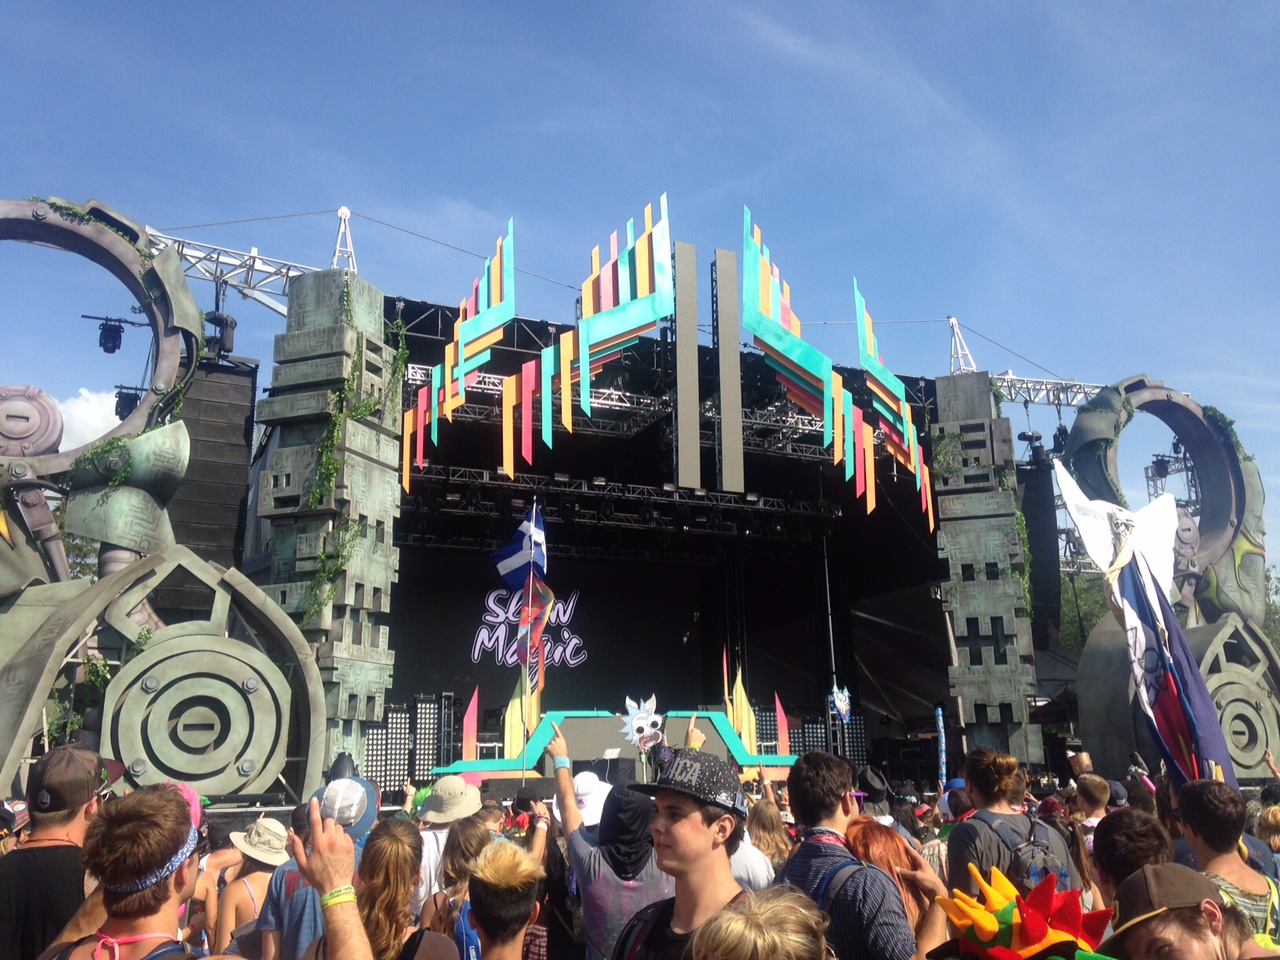 electric forest festival 2015